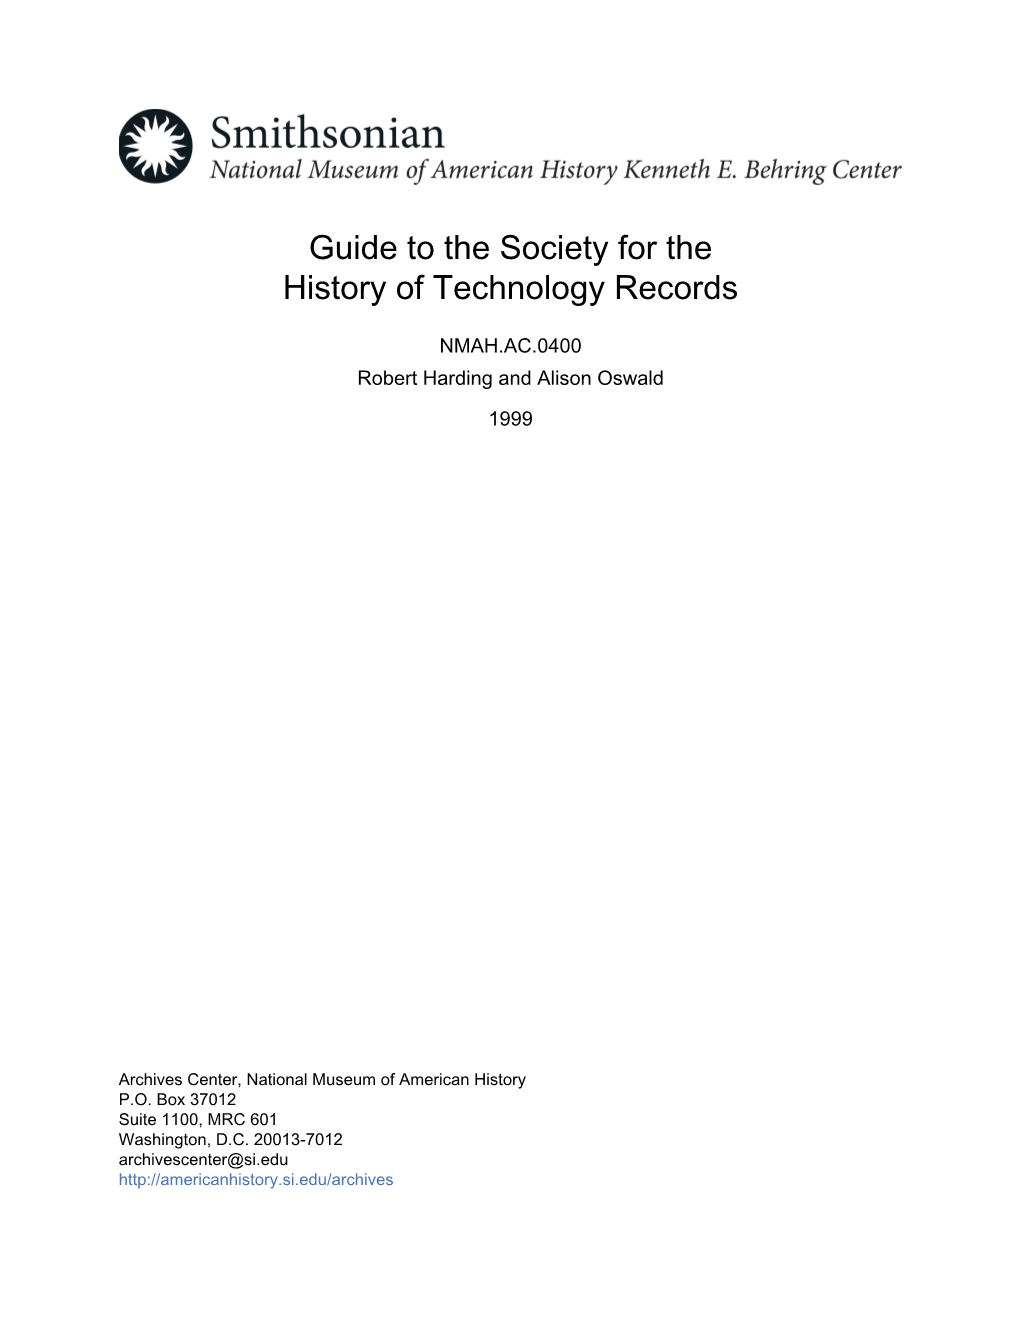 Guide to the Society for the History of Technology Records